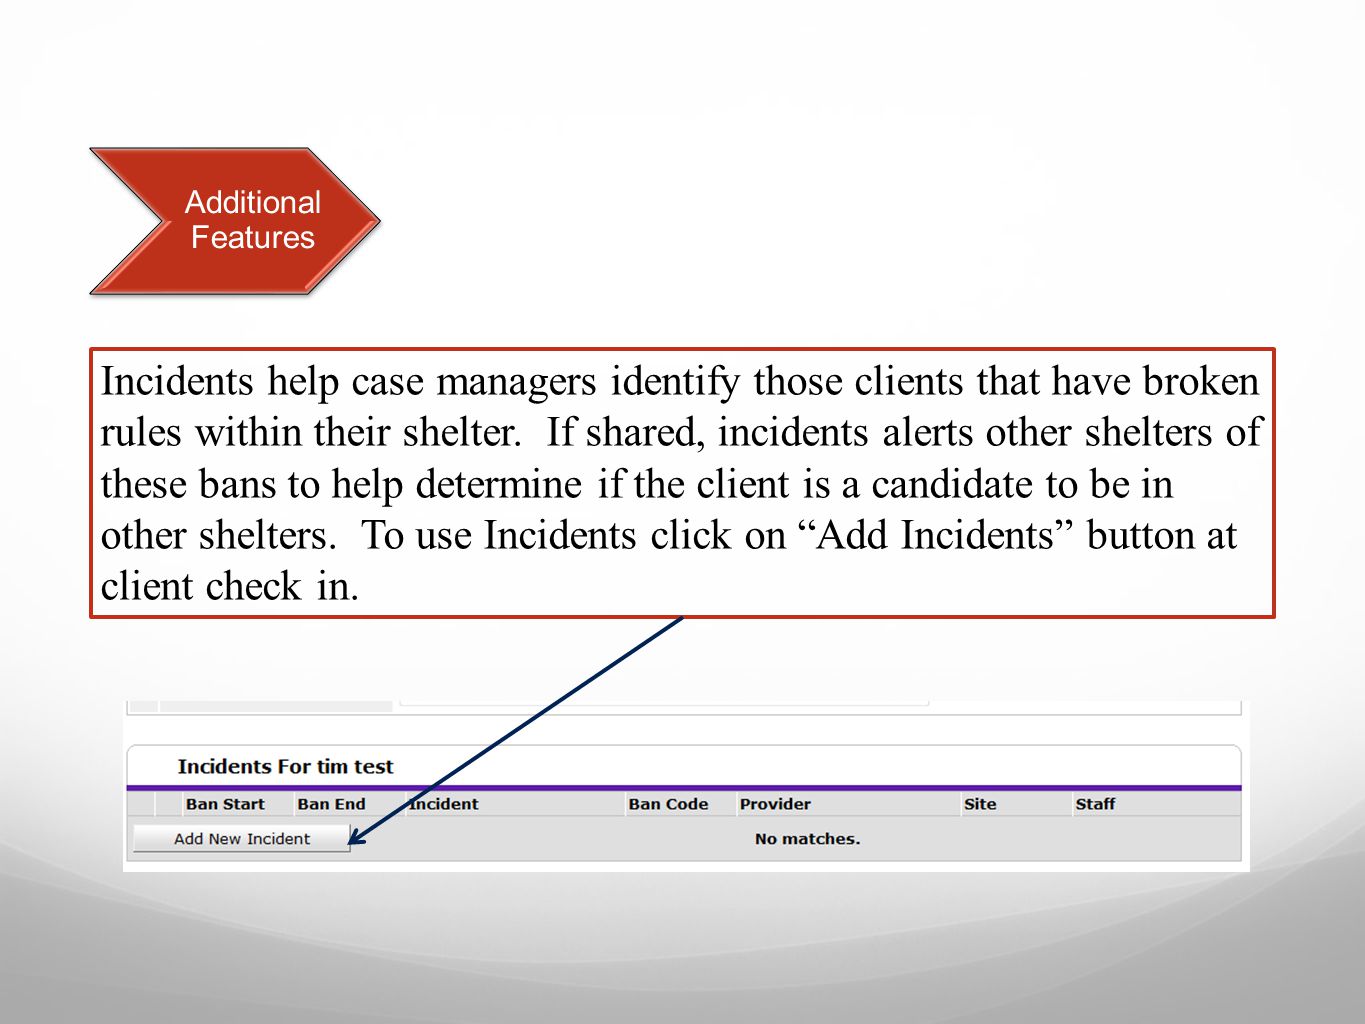 Incidents help case managers identify those clients that have broken rules within their shelter.